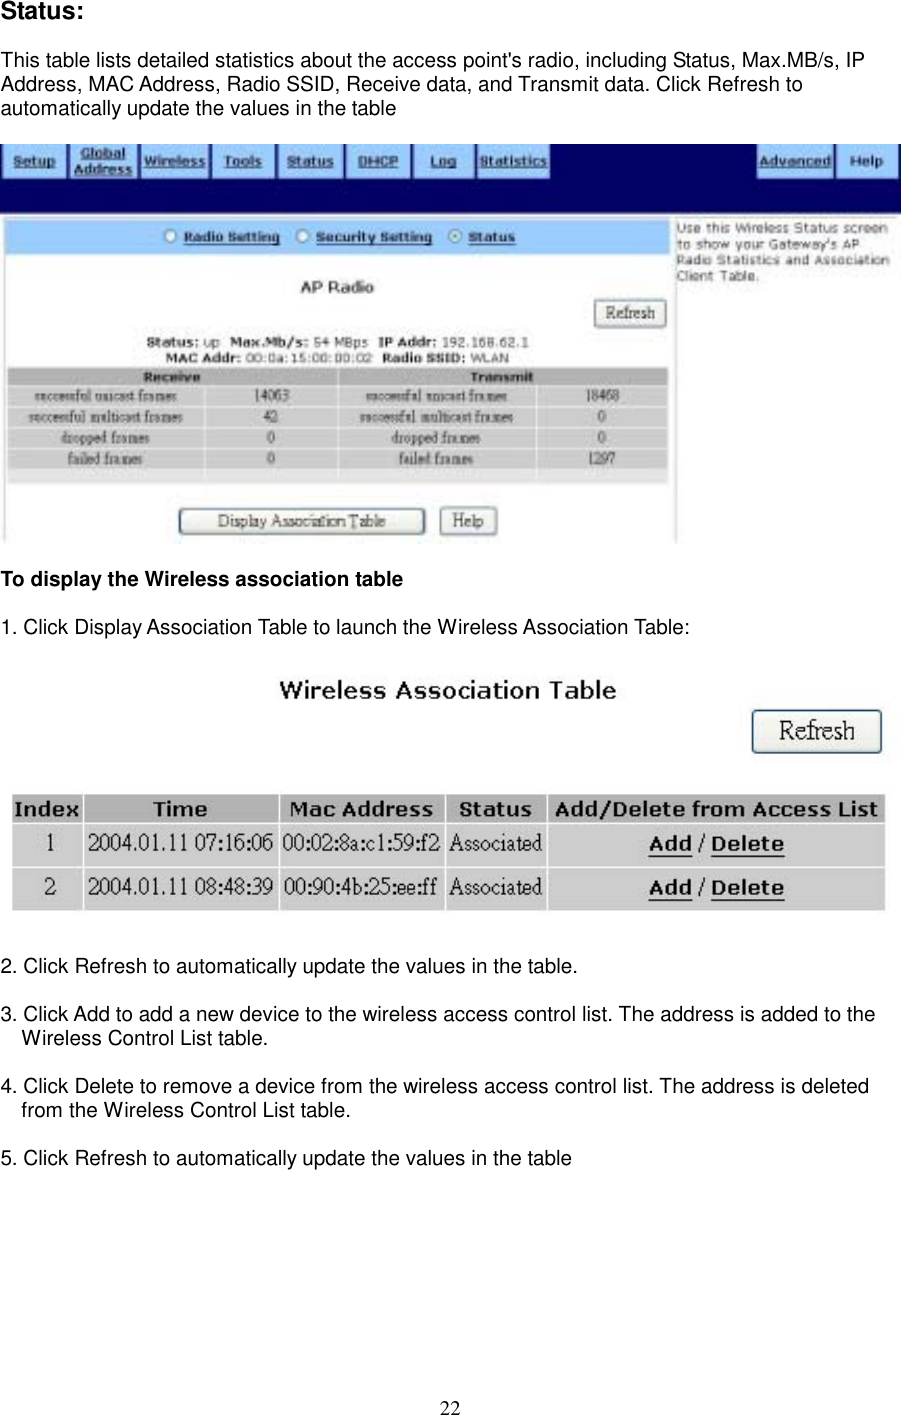  22Status:  This table lists detailed statistics about the access point&apos;s radio, including Status, Max.MB/s, IP Address, MAC Address, Radio SSID, Receive data, and Transmit data. Click Refresh to automatically update the values in the table    To display the Wireless association table  1. Click Display Association Table to launch the Wireless Association Table:    2. Click Refresh to automatically update the values in the table.  3. Click Add to add a new device to the wireless access control list. The address is added to the Wireless Control List table.  4. Click Delete to remove a device from the wireless access control list. The address is deleted from the Wireless Control List table.  5. Click Refresh to automatically update the values in the table   